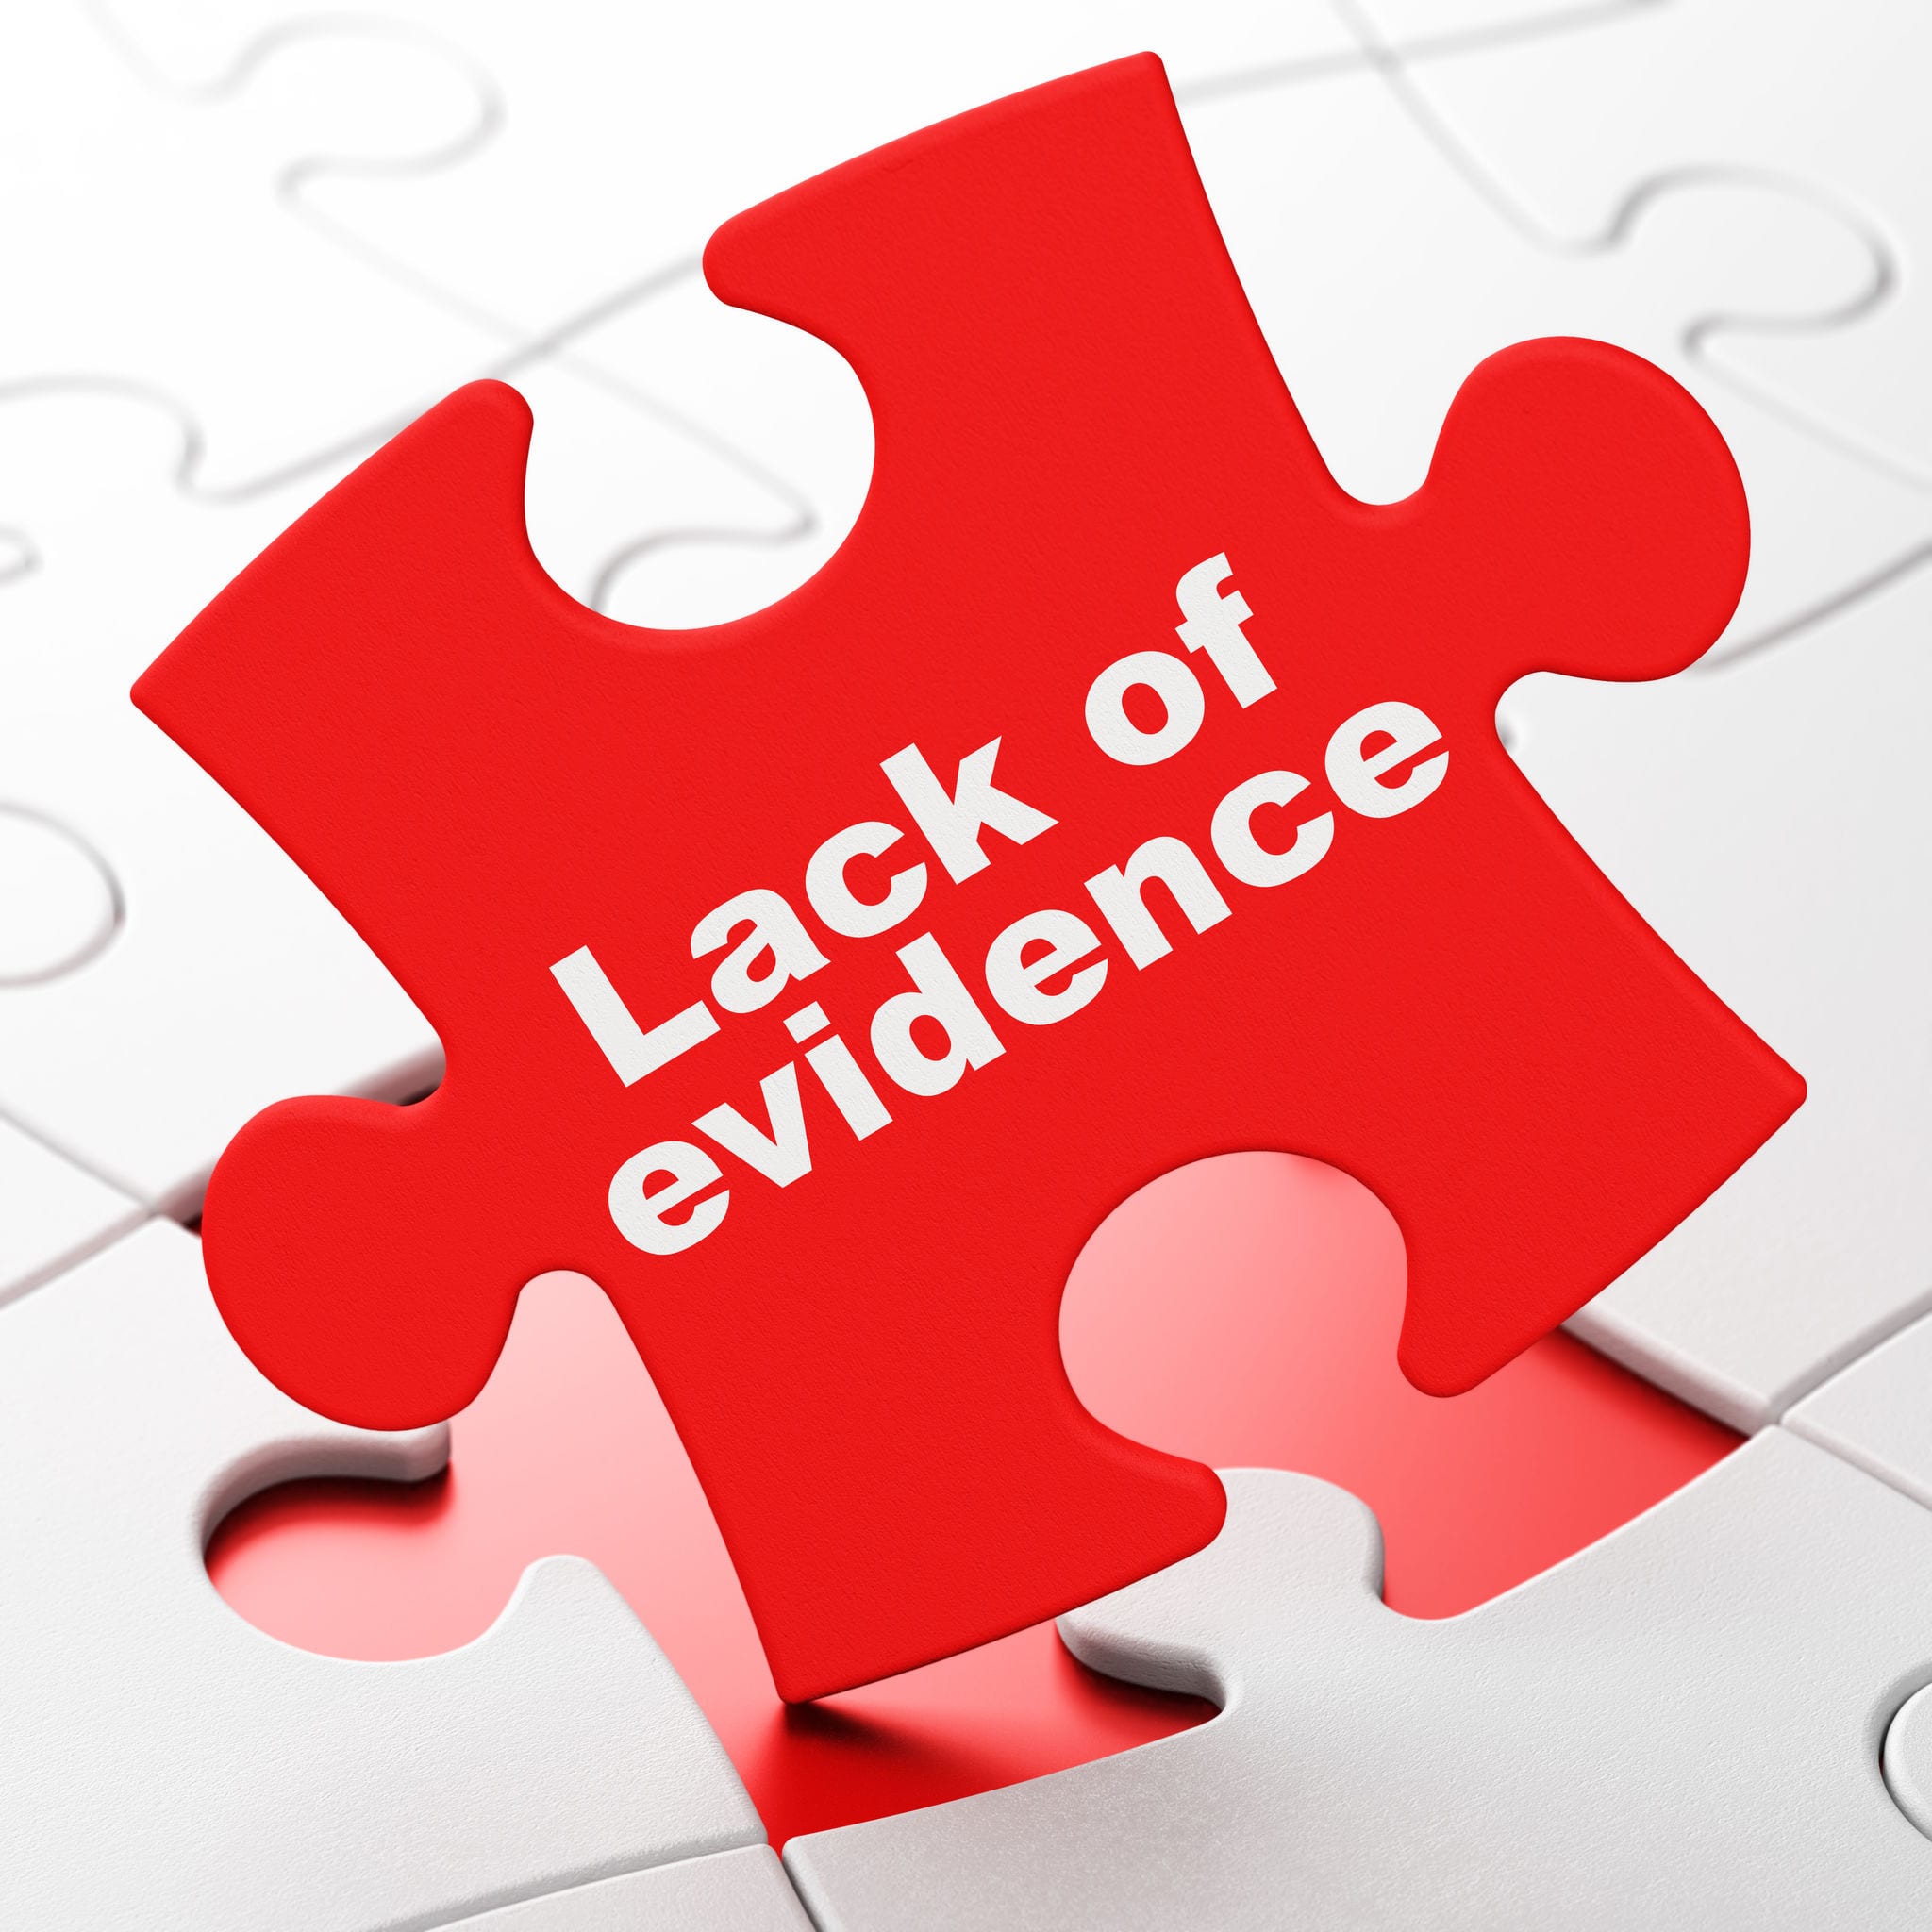 Lack of Evidence in a Crime